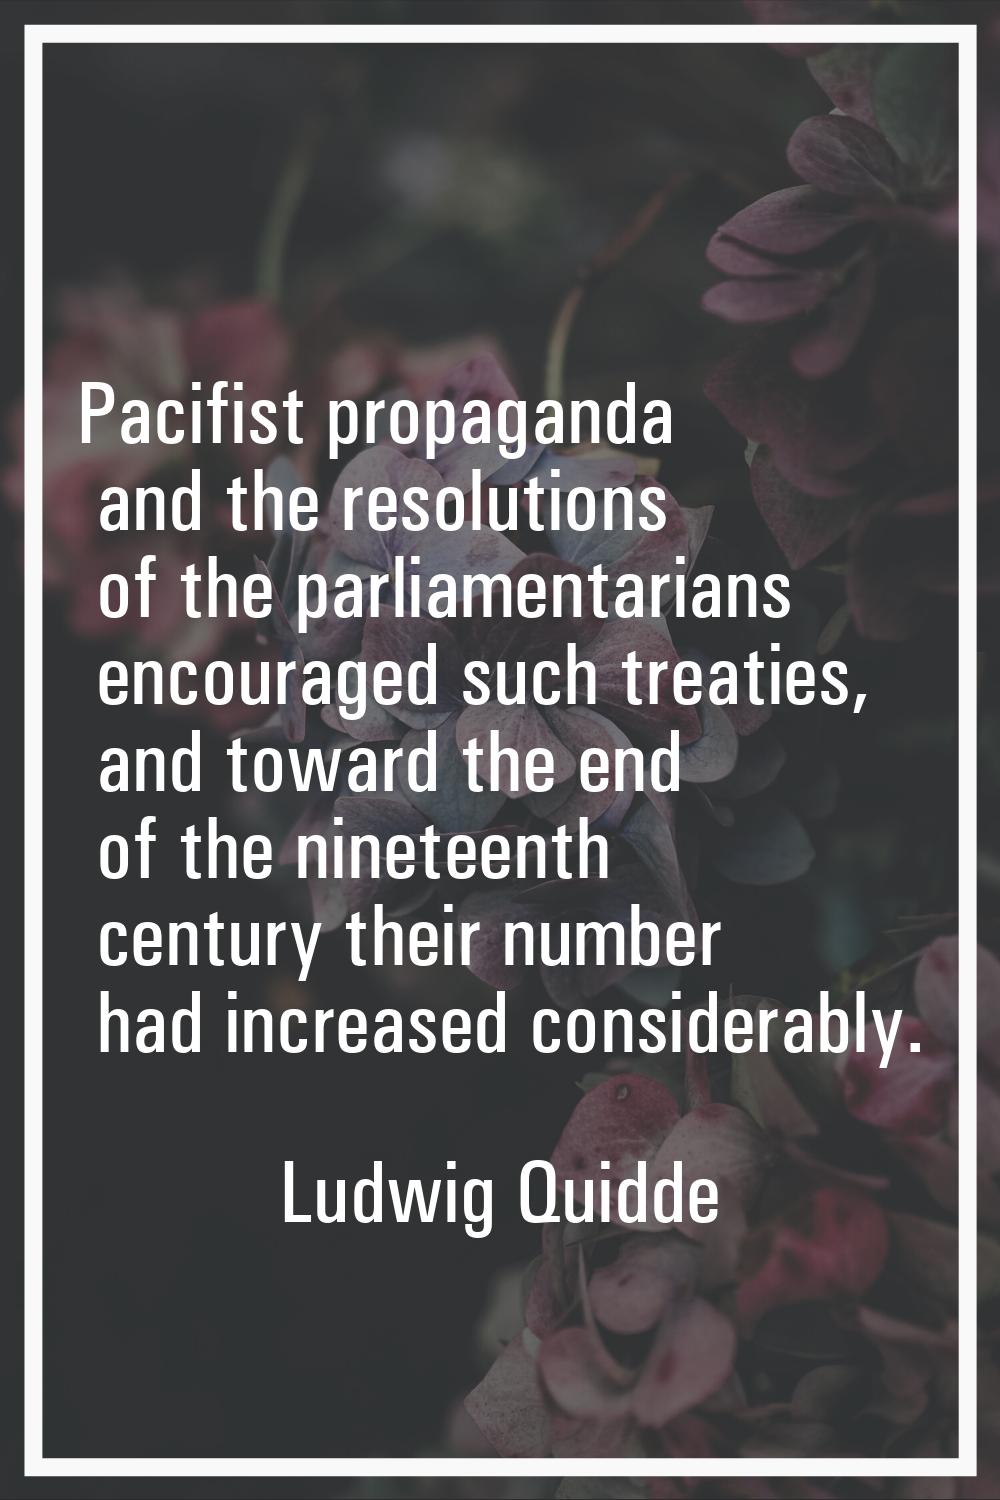 Pacifist propaganda and the resolutions of the parliamentarians encouraged such treaties, and towar